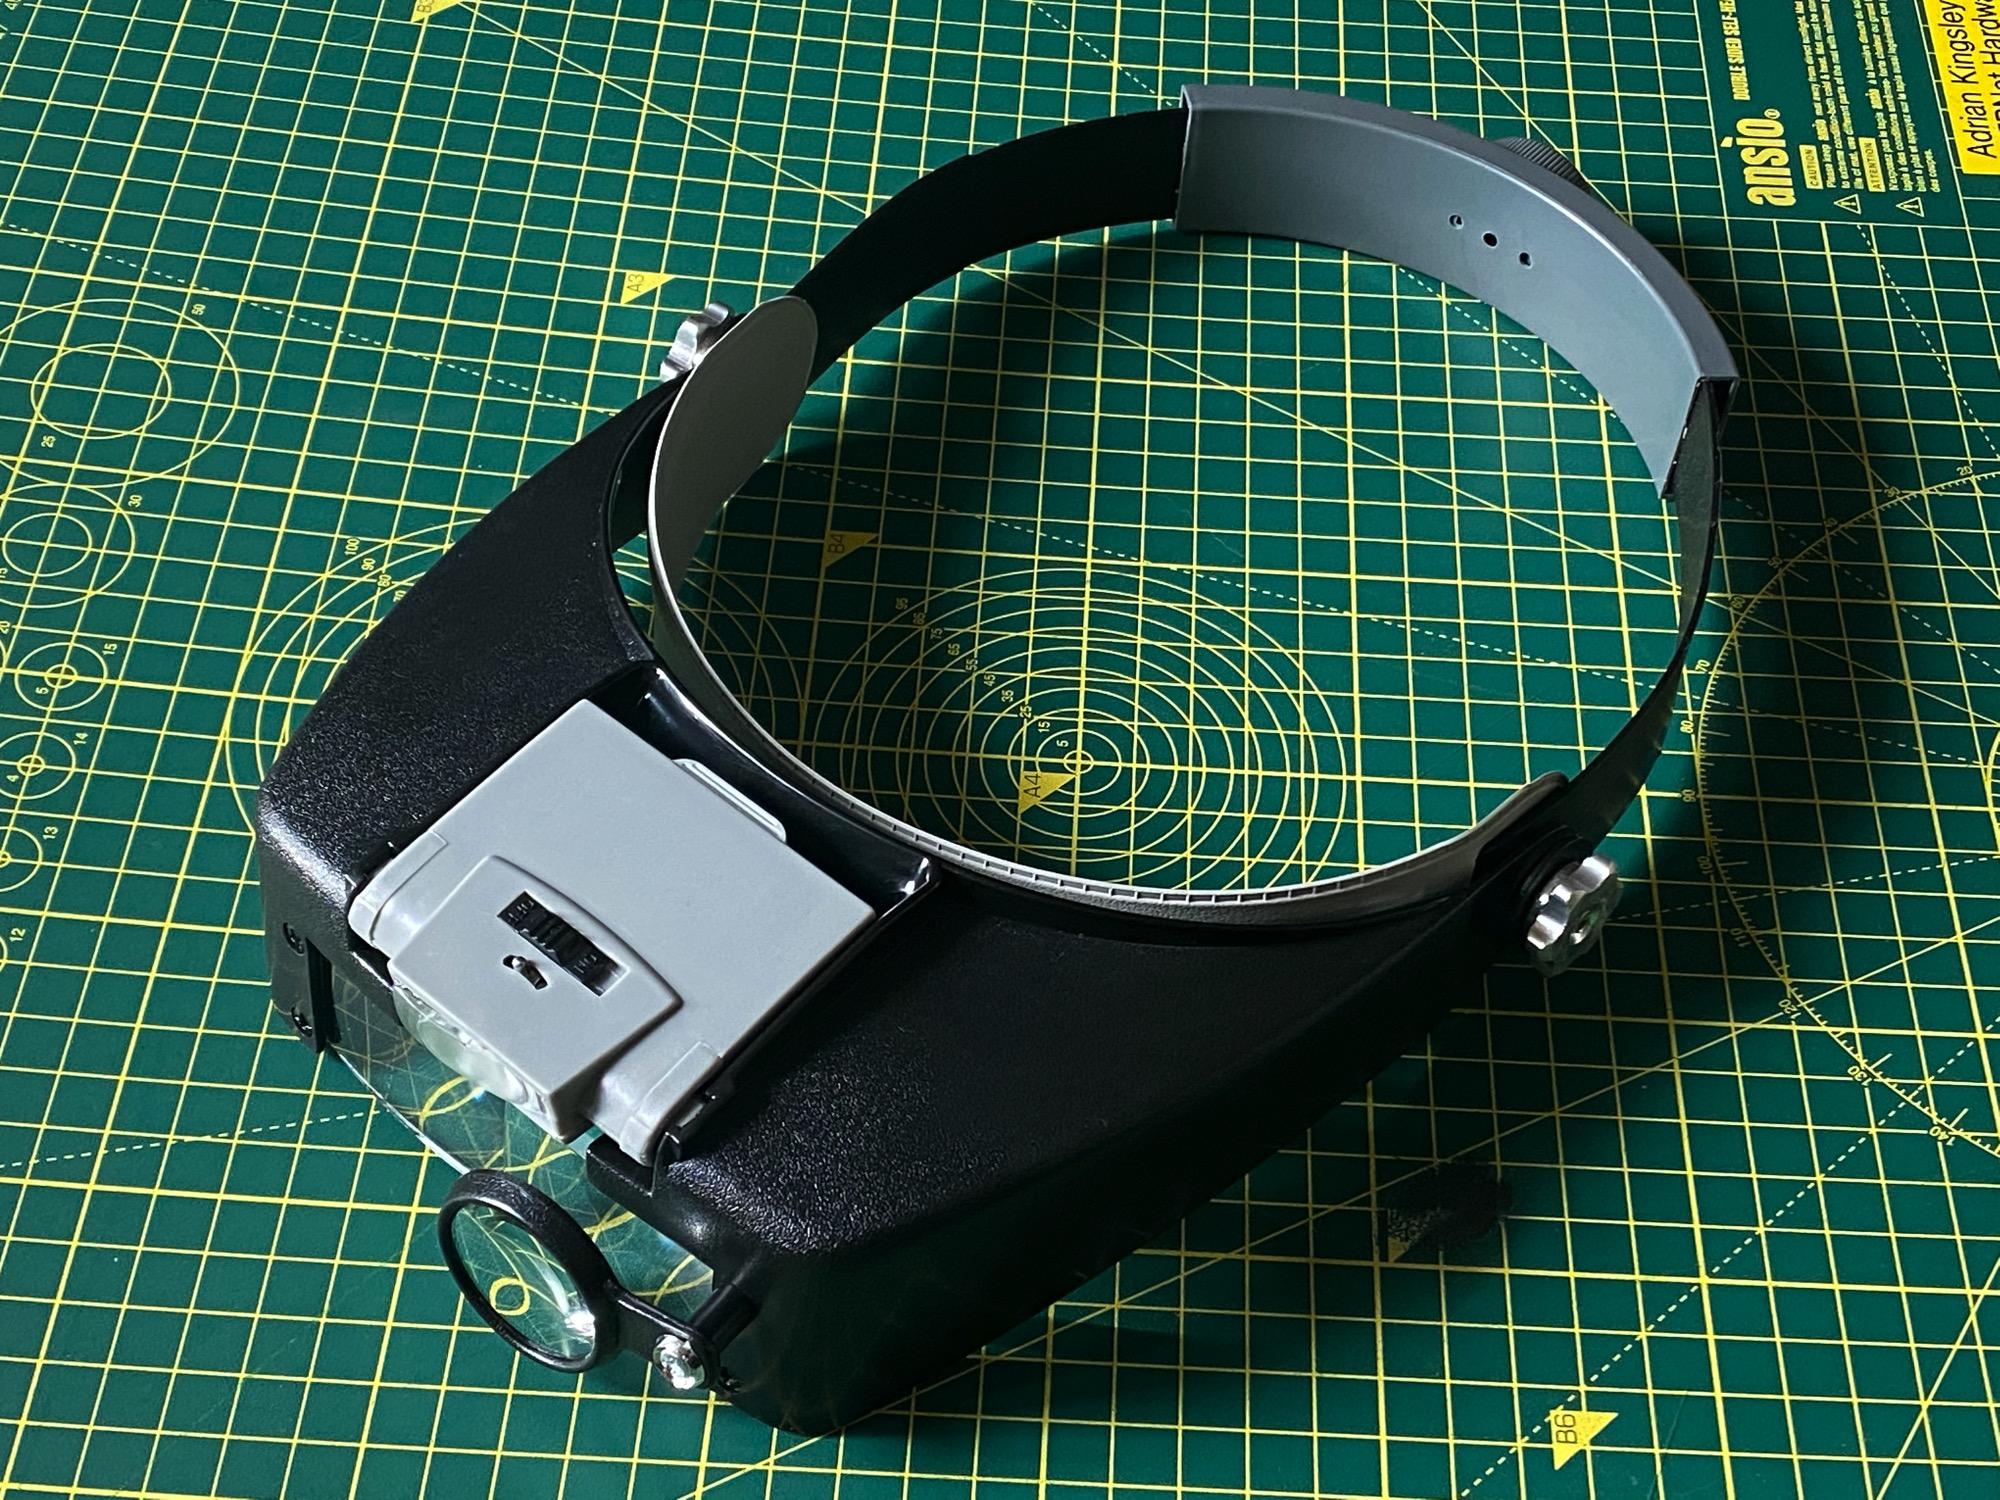 SE head-mounted magnifier